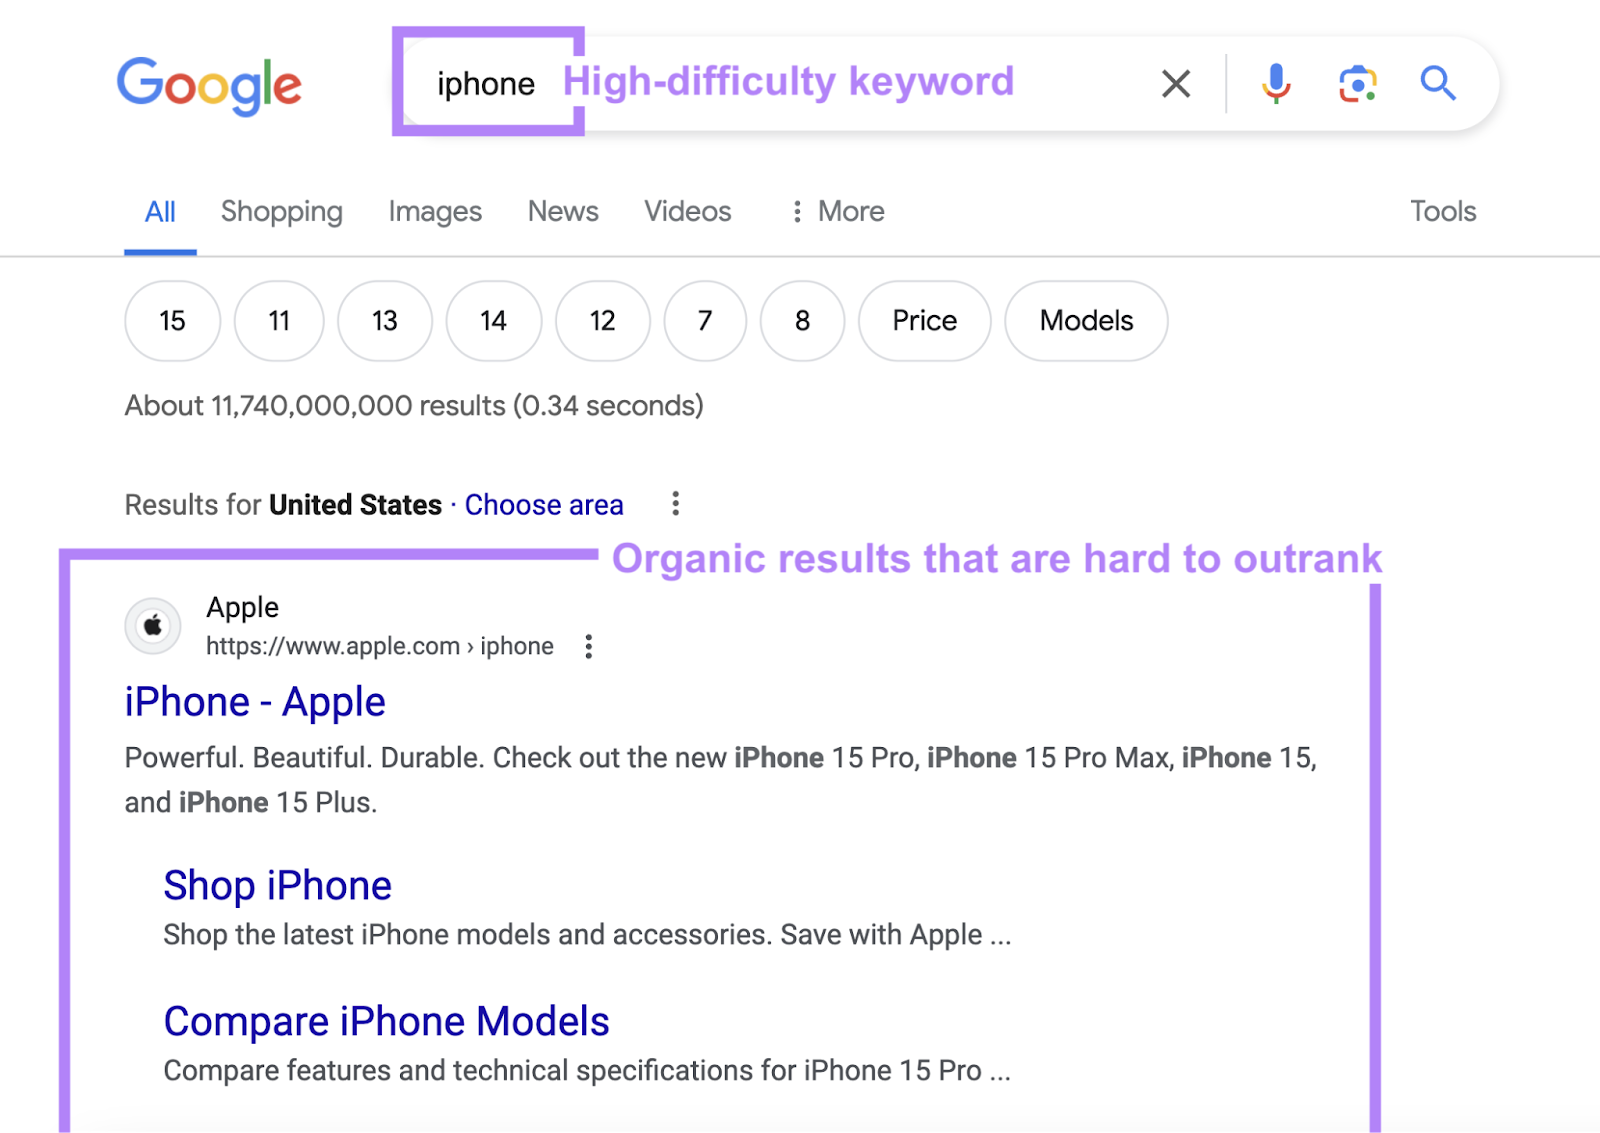 Google hunt  for the precocious   trouble  keyword iphone with integrated  results that are hard   to outrank.